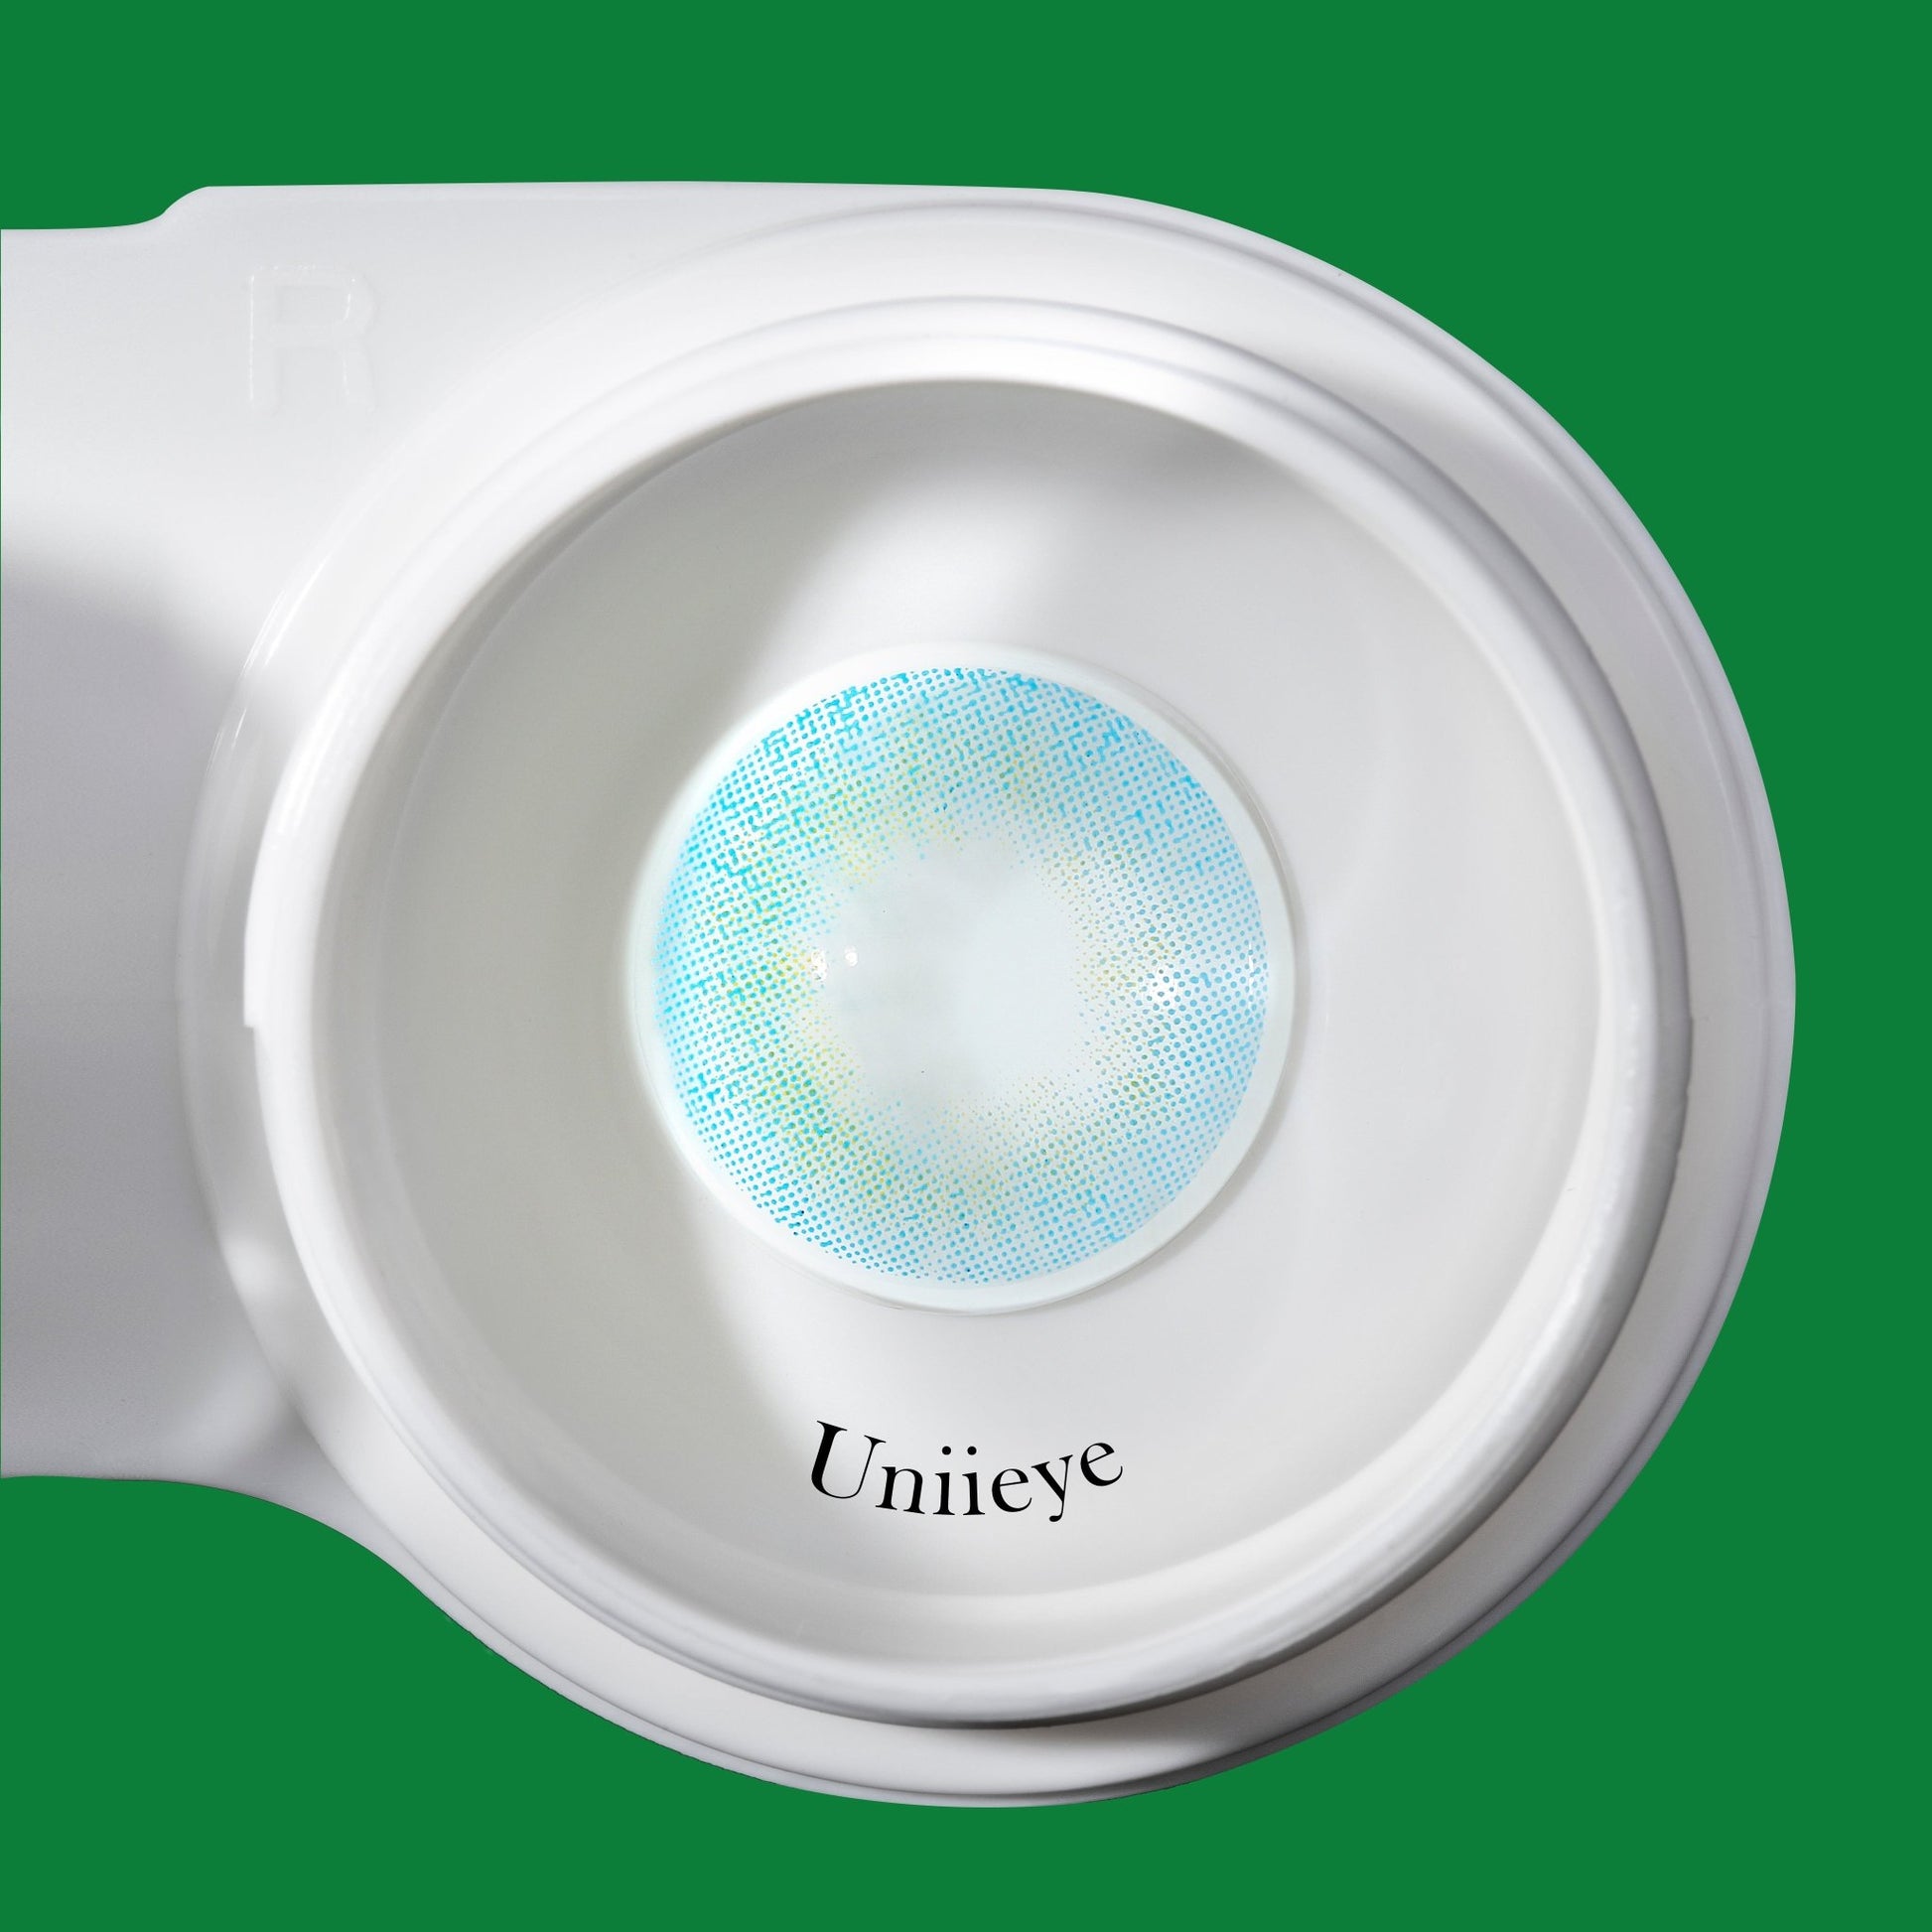 UNIIEYE Athena Sky Blue Yearly Colored Contact Lenses - Uniieye